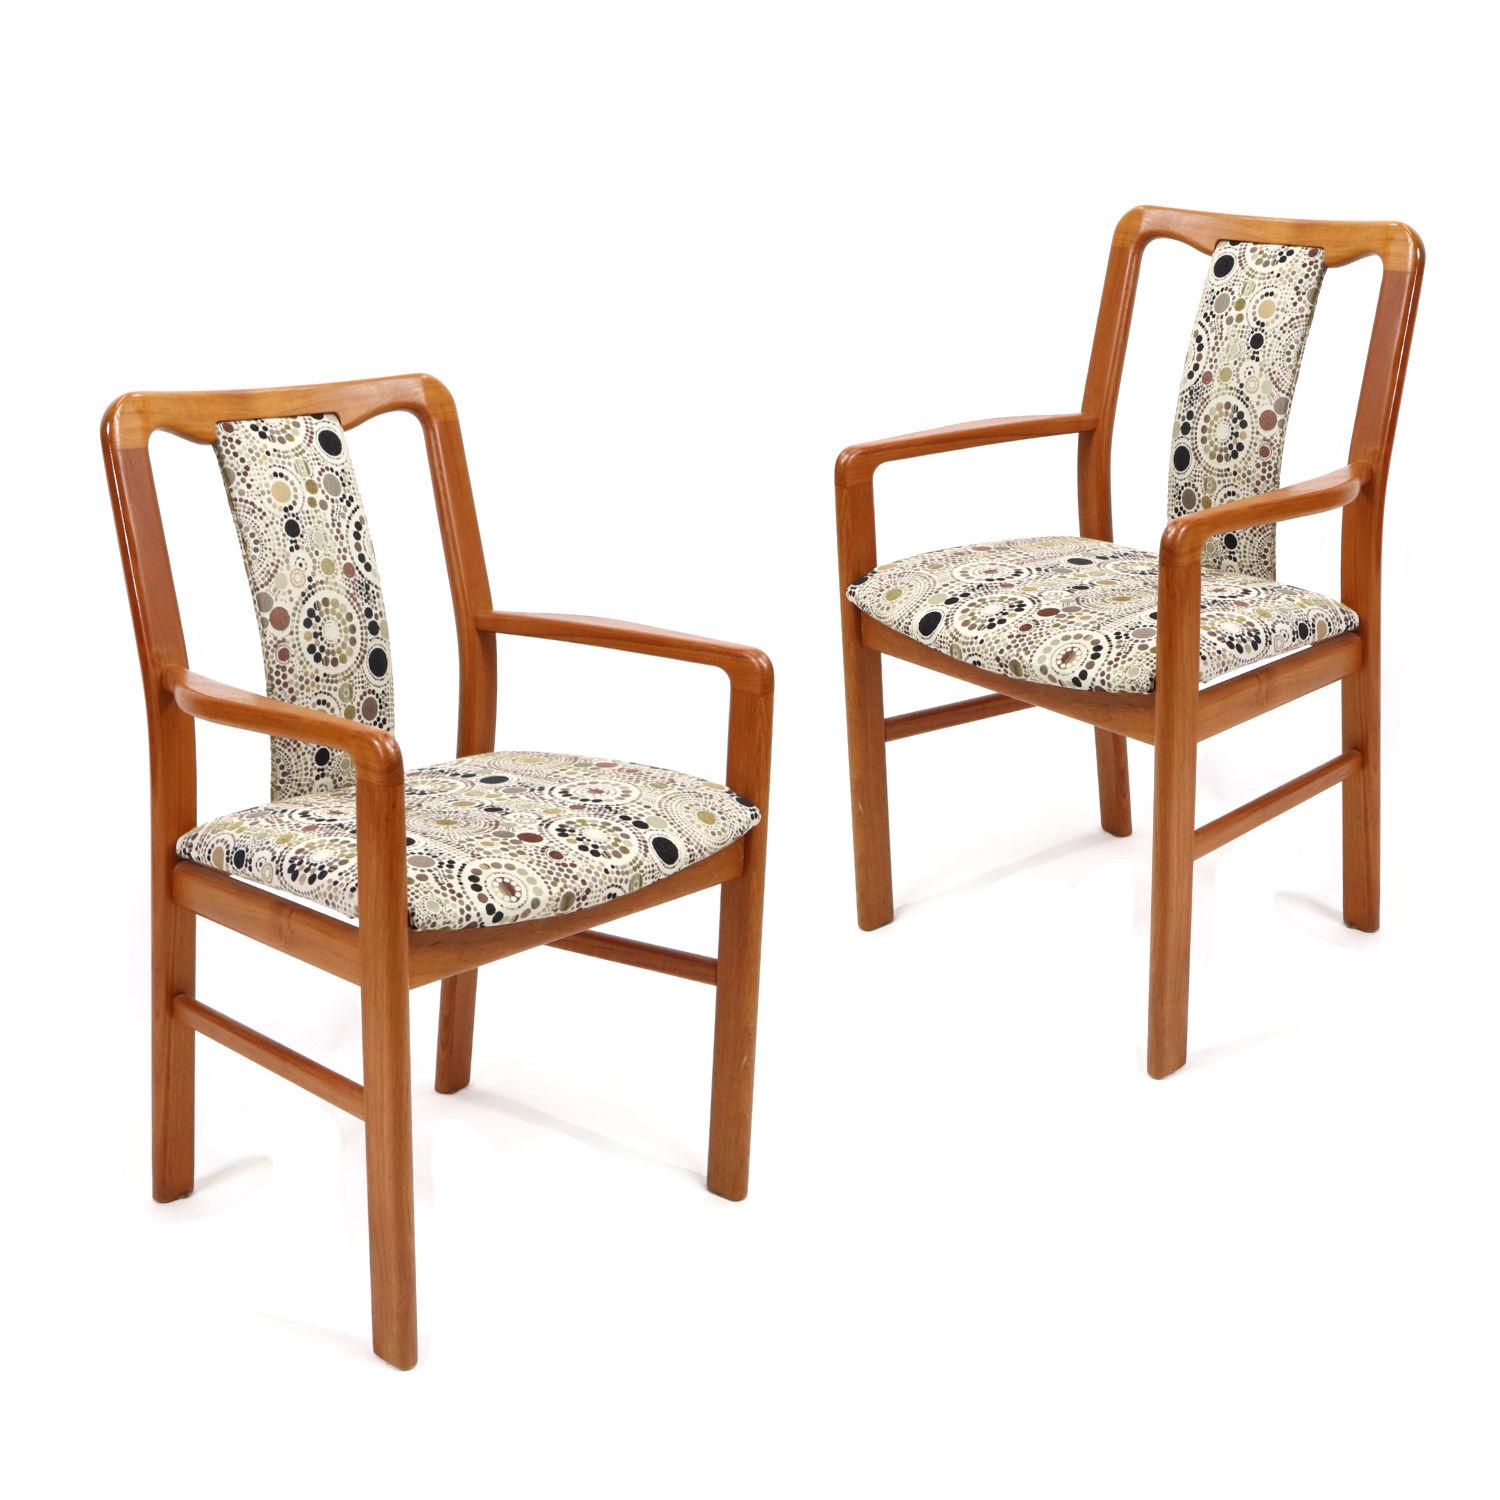 Set of six Danish modern teak dining chairs by Boltinge. This group of six includes four armless side chairs and two captain’s chairs with arms. Each of the chairs have been recently upholstered in a lively pattern of neutral tones. The modern